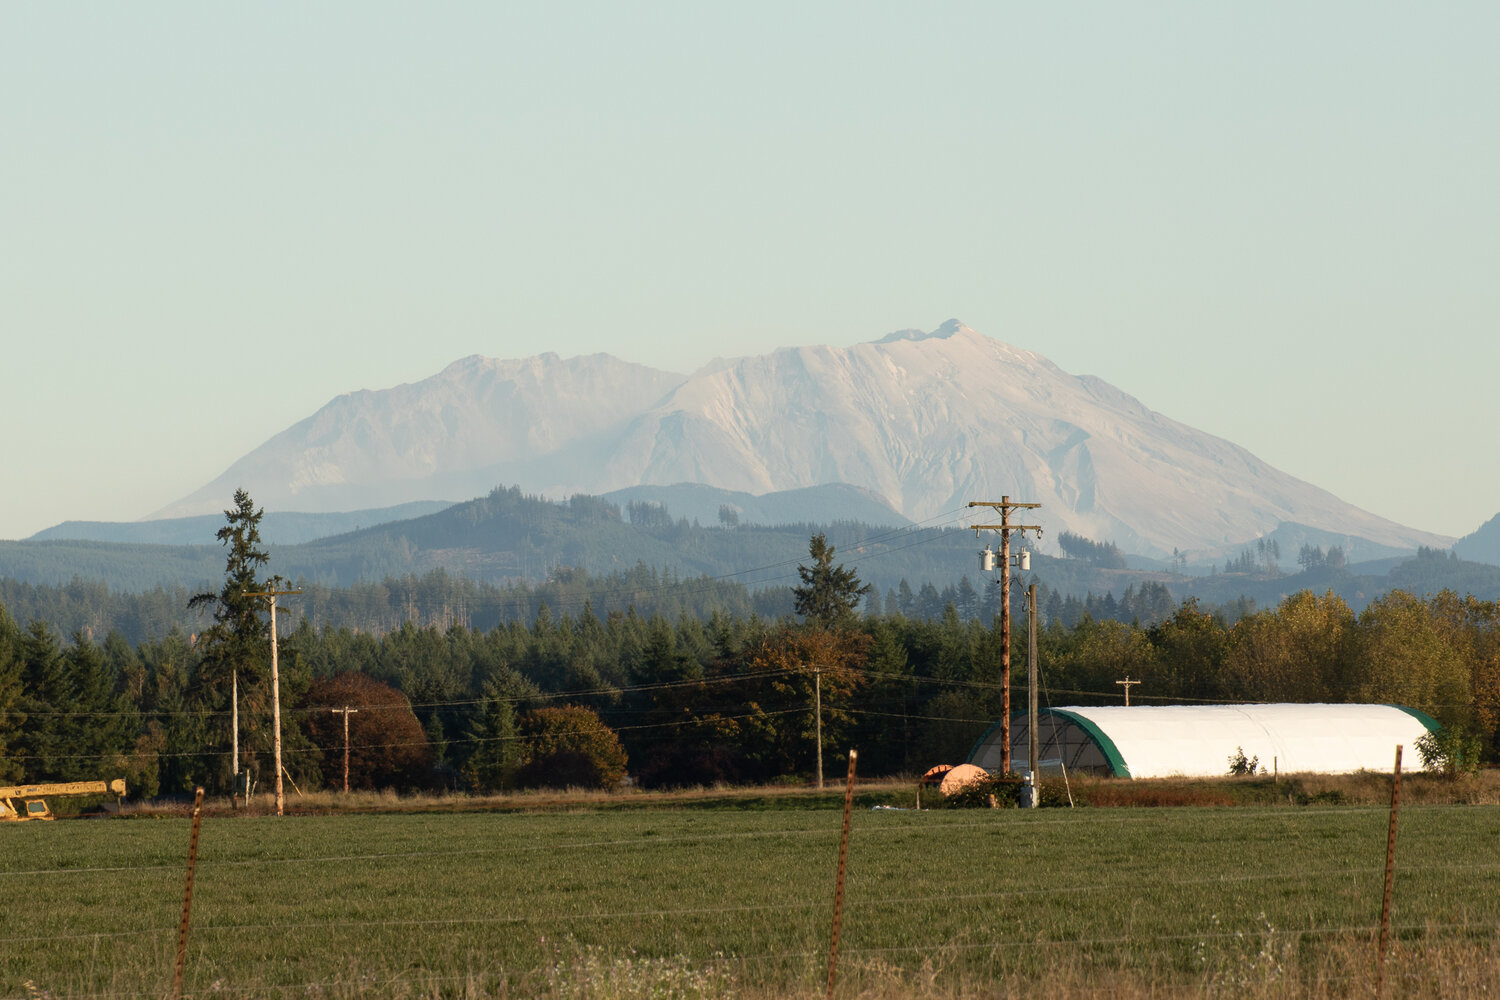 Mount St. Helens is seen from The Mason Jar event center on Sunday, Oct. 8.